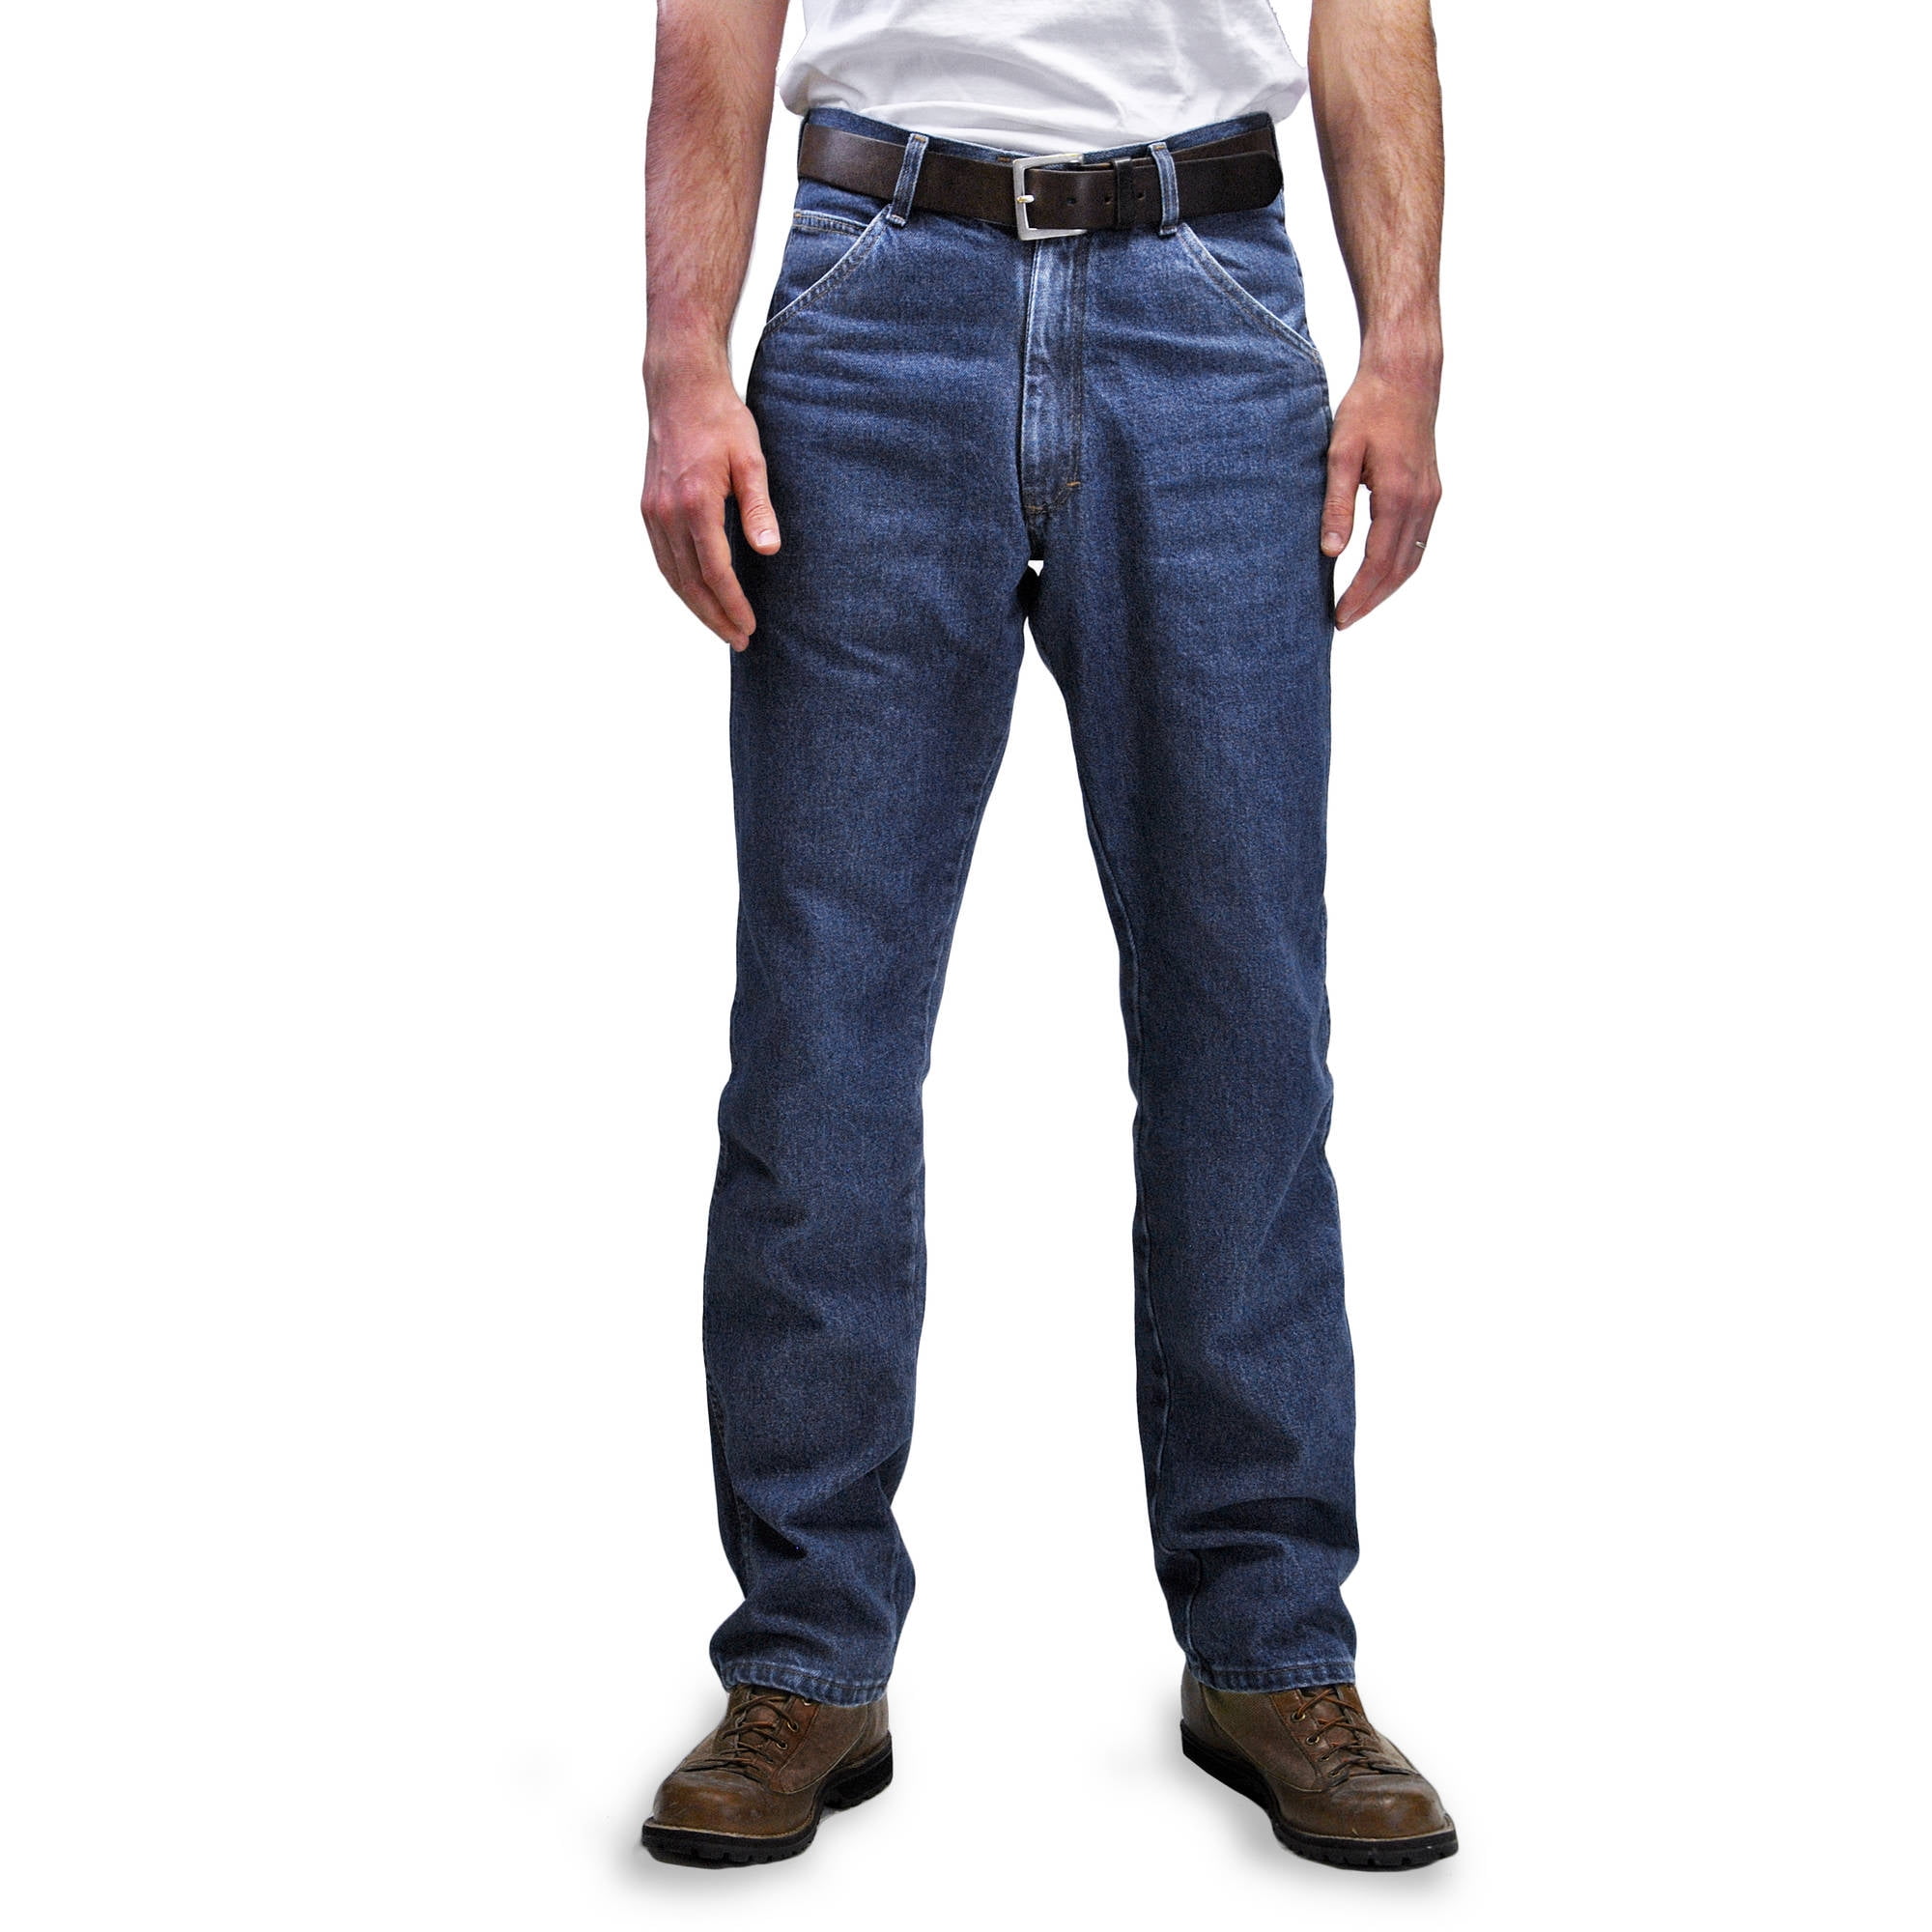 roundhouse jeans retailers